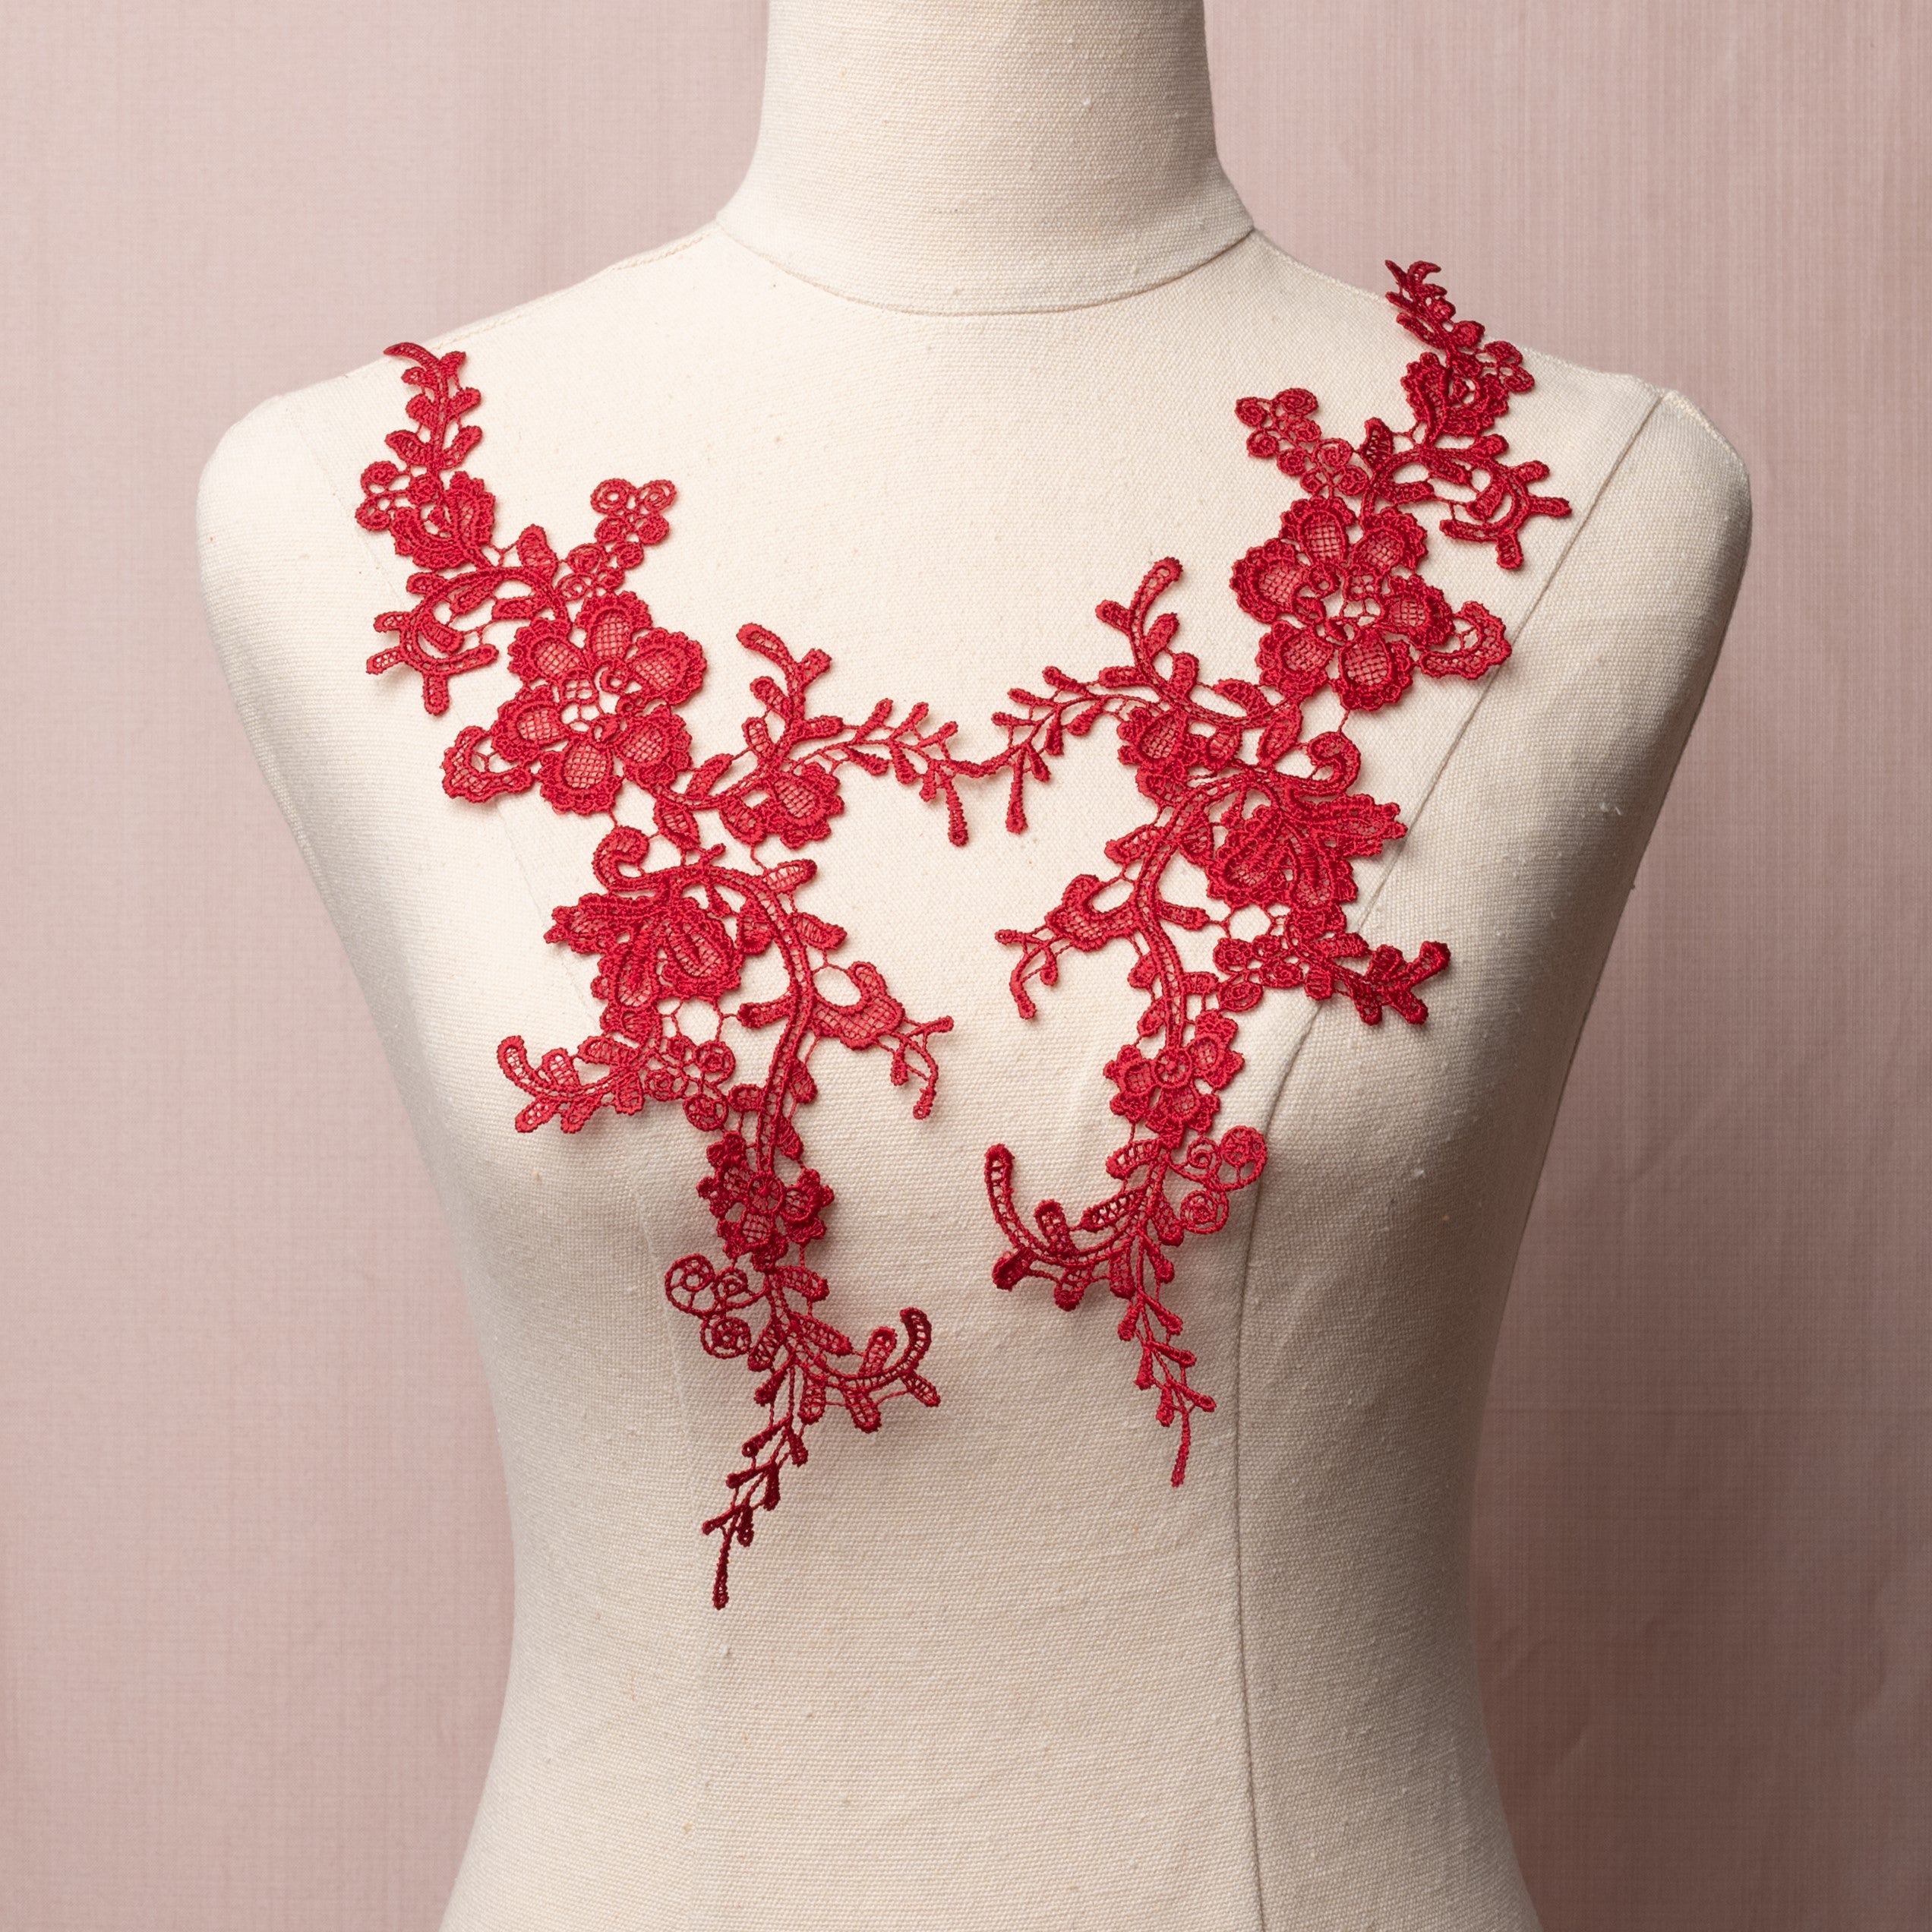 Heavily embroidered burgundy floral applique pair displayed on a mannequin.